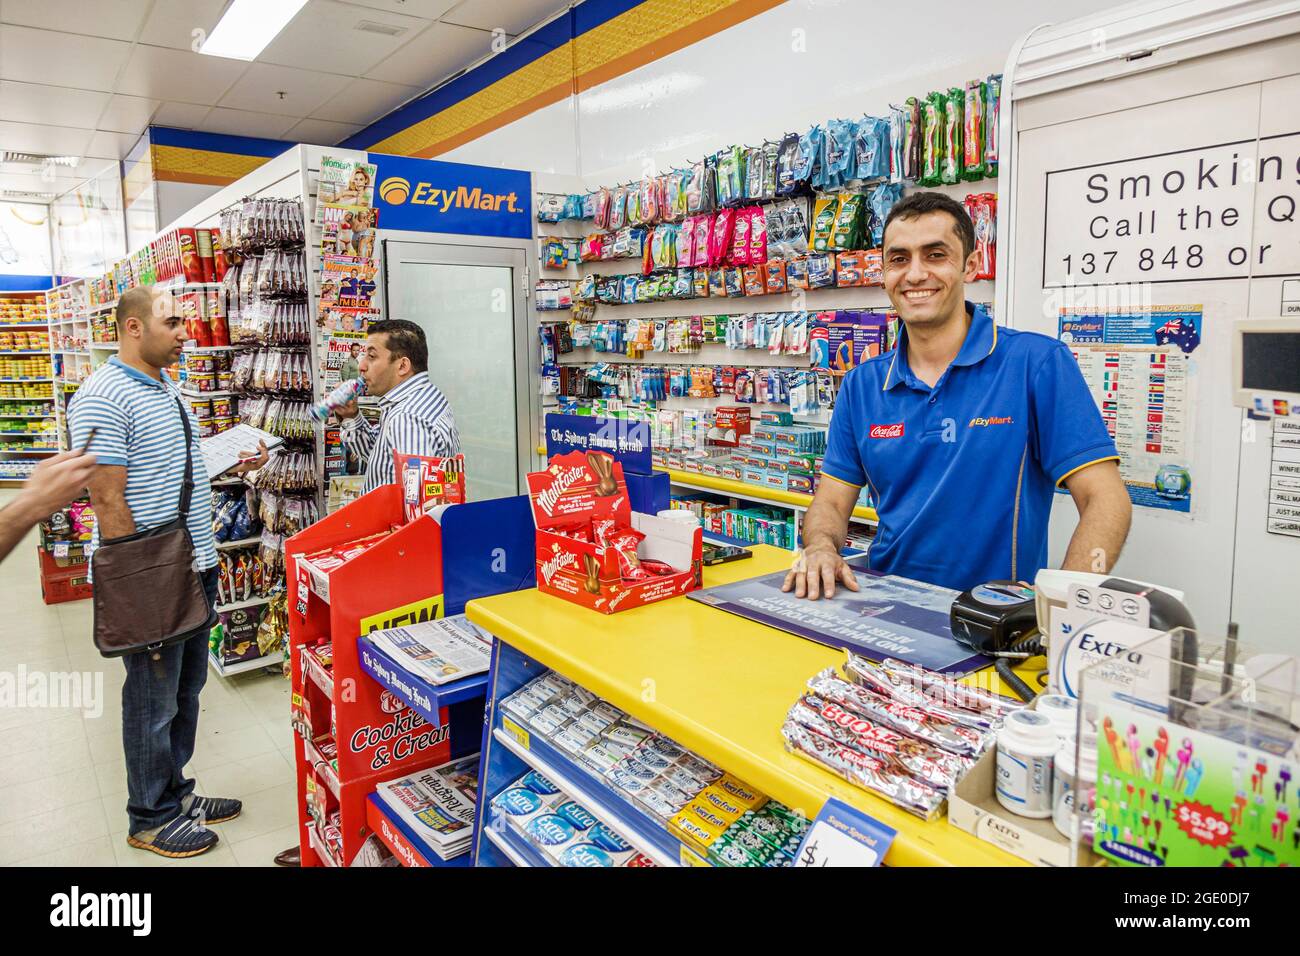 Ezymart Convenience Store Interior Inside Hi Res Stock Photography And